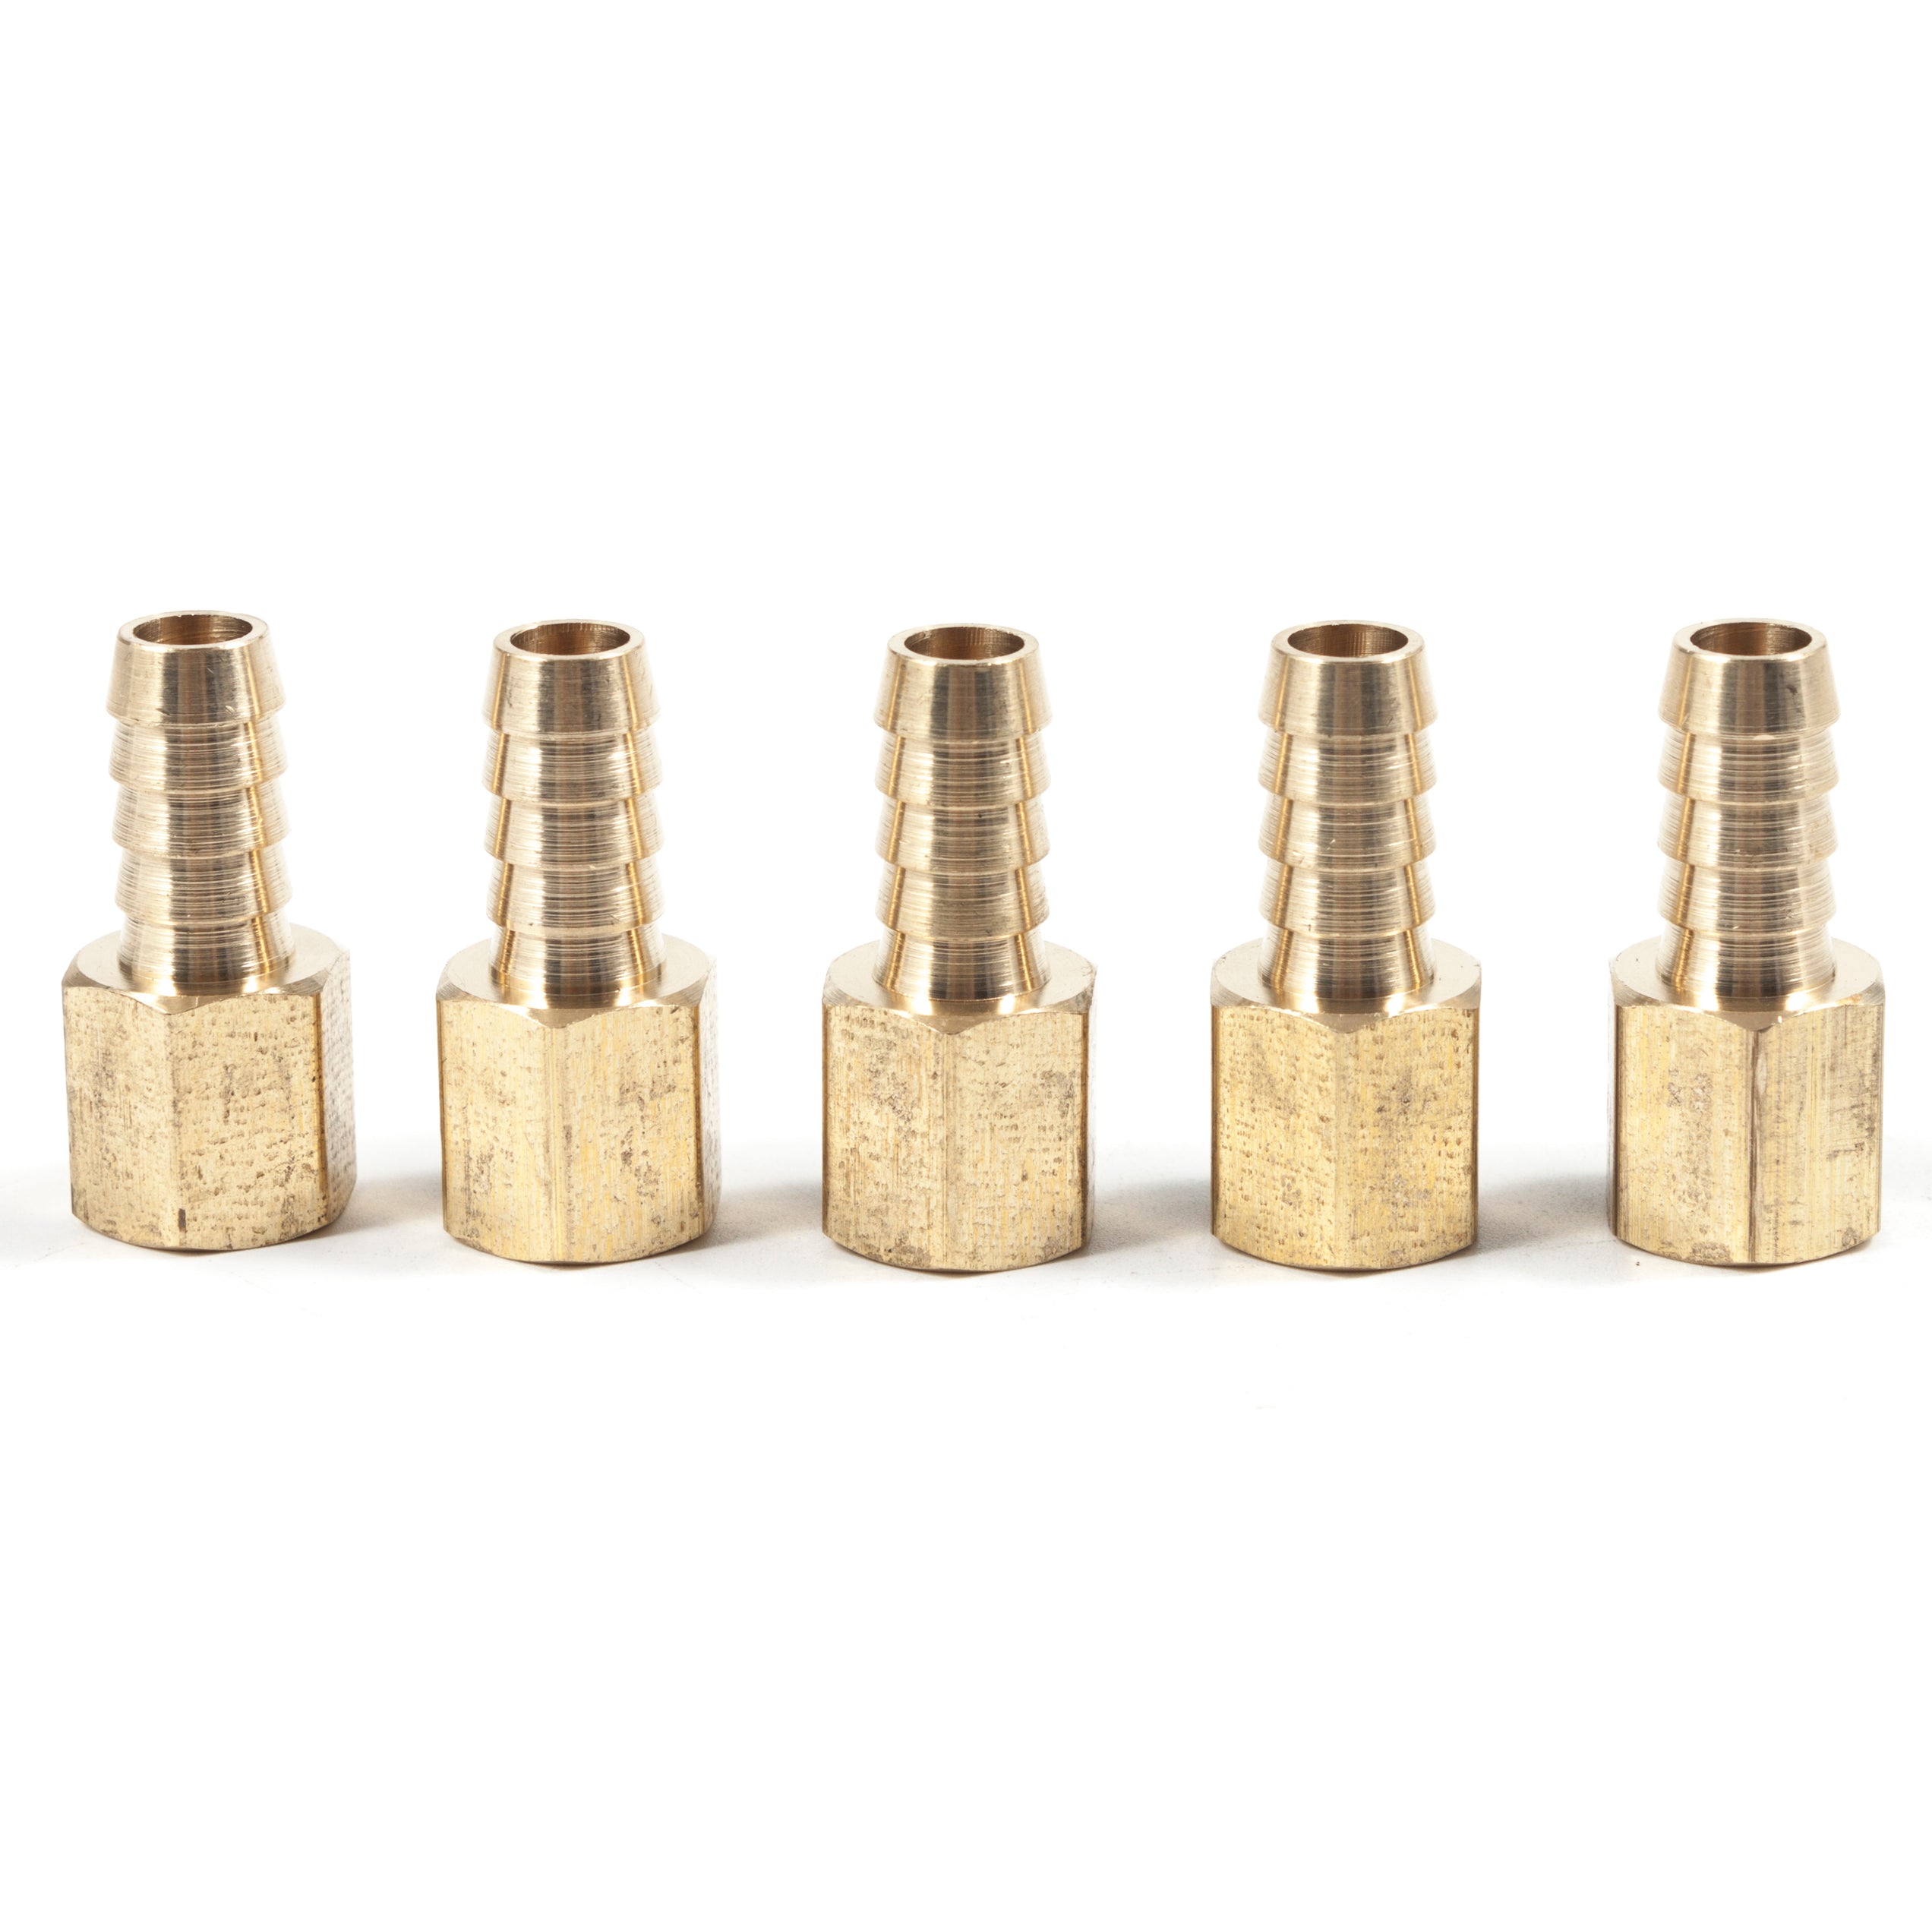 LTWFITTING Brass Fitting Coupler 3/8-Inch Hose ID x 1/4-Inch Female NPT Fuel Water Gas(Pack of 5)